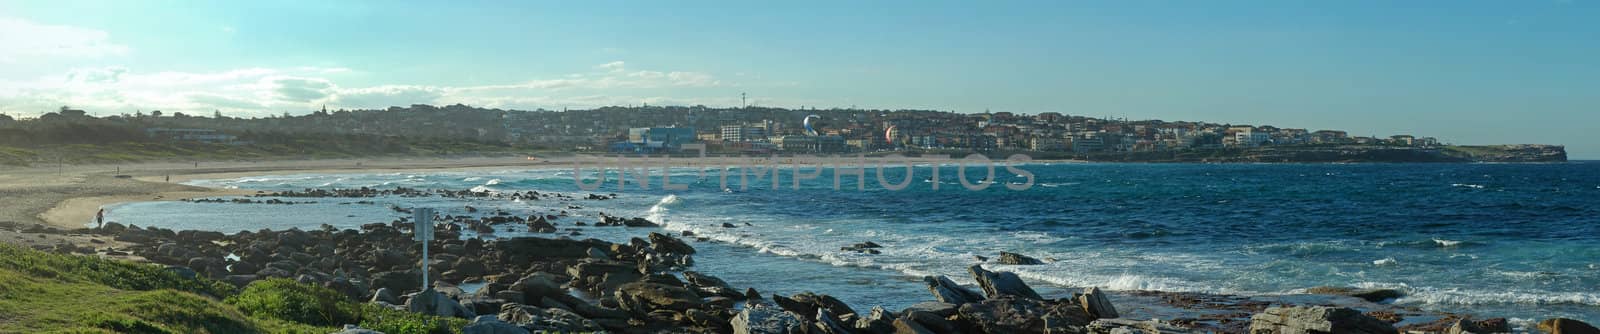 famous maroubra beach in sydney panorama photo, rocks in foreground